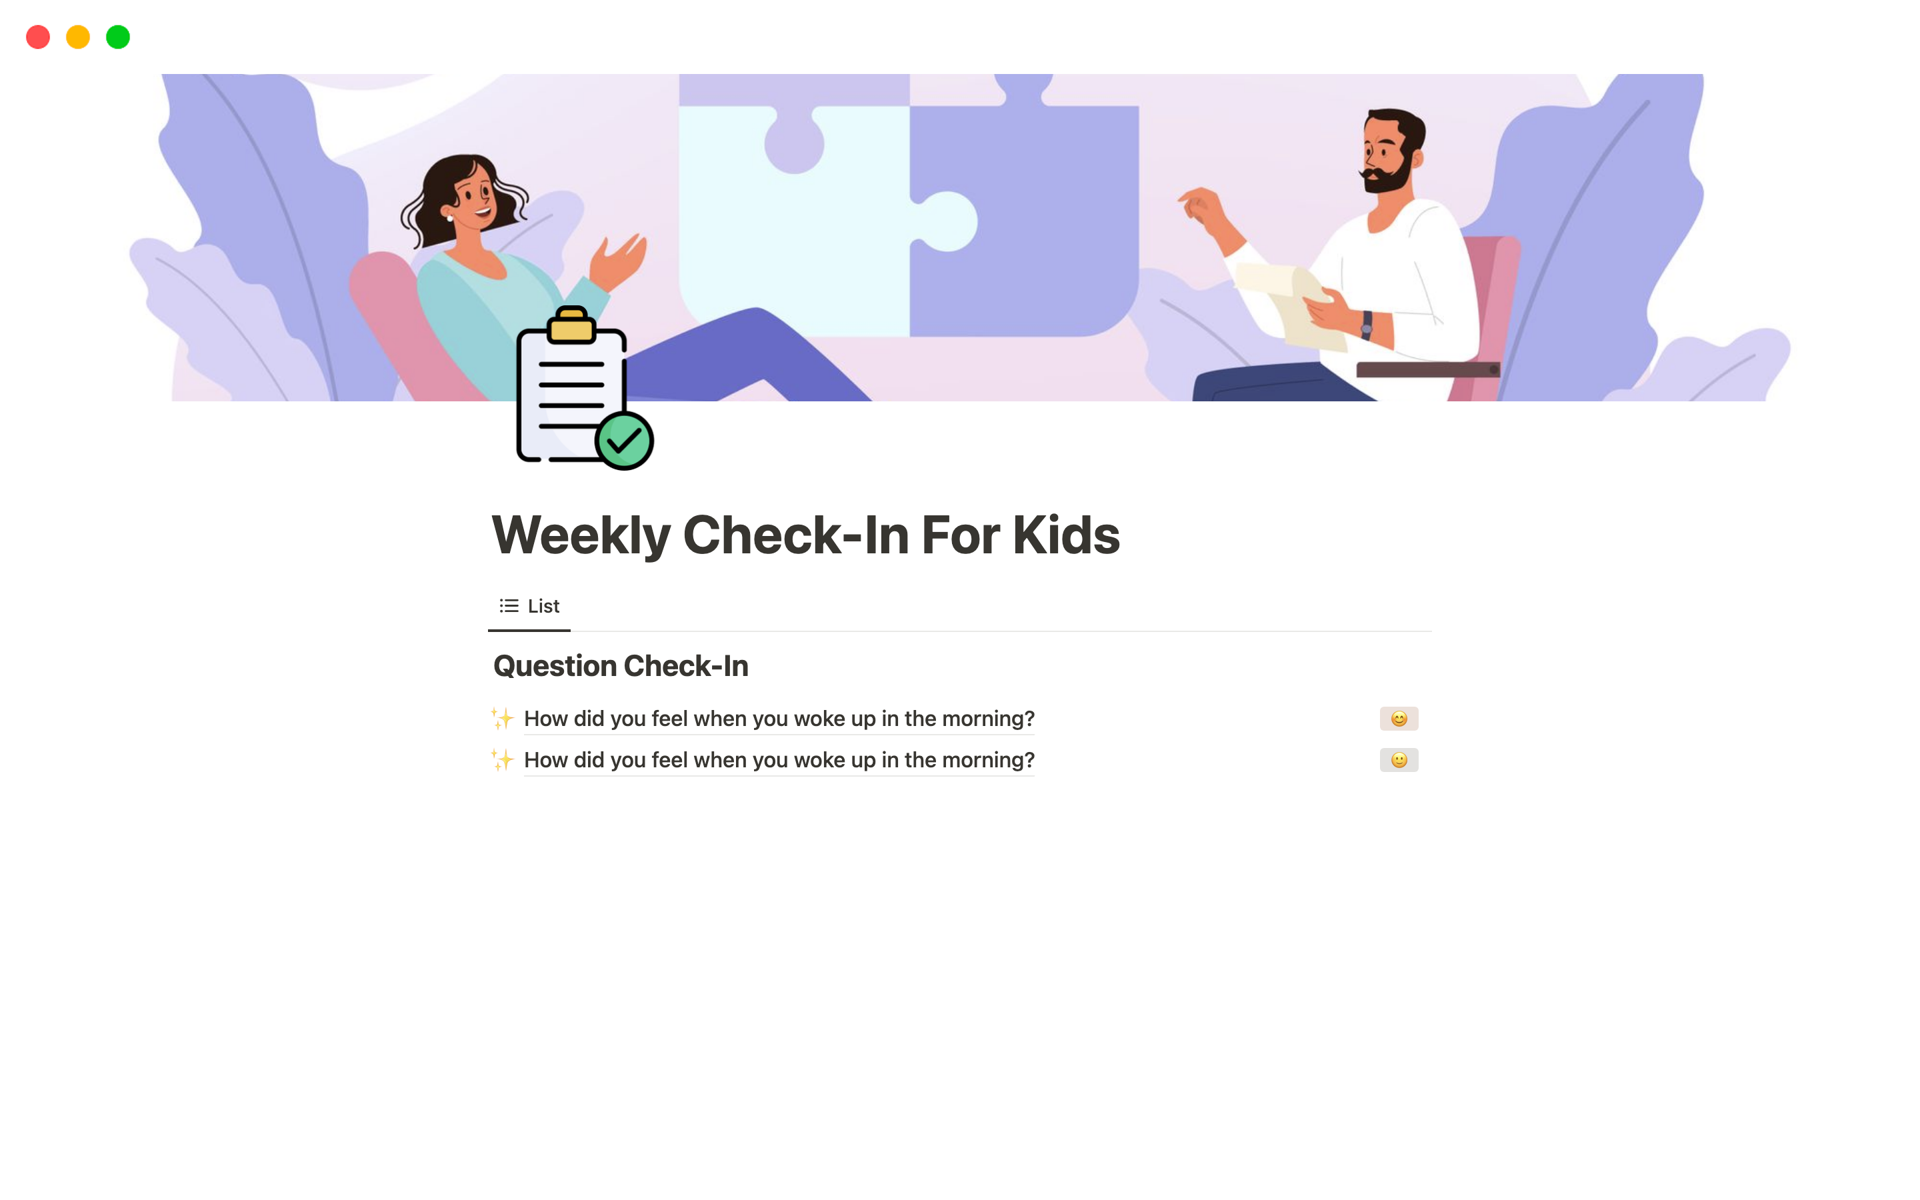 Weekly Check-In For Kidsのテンプレートのプレビュー